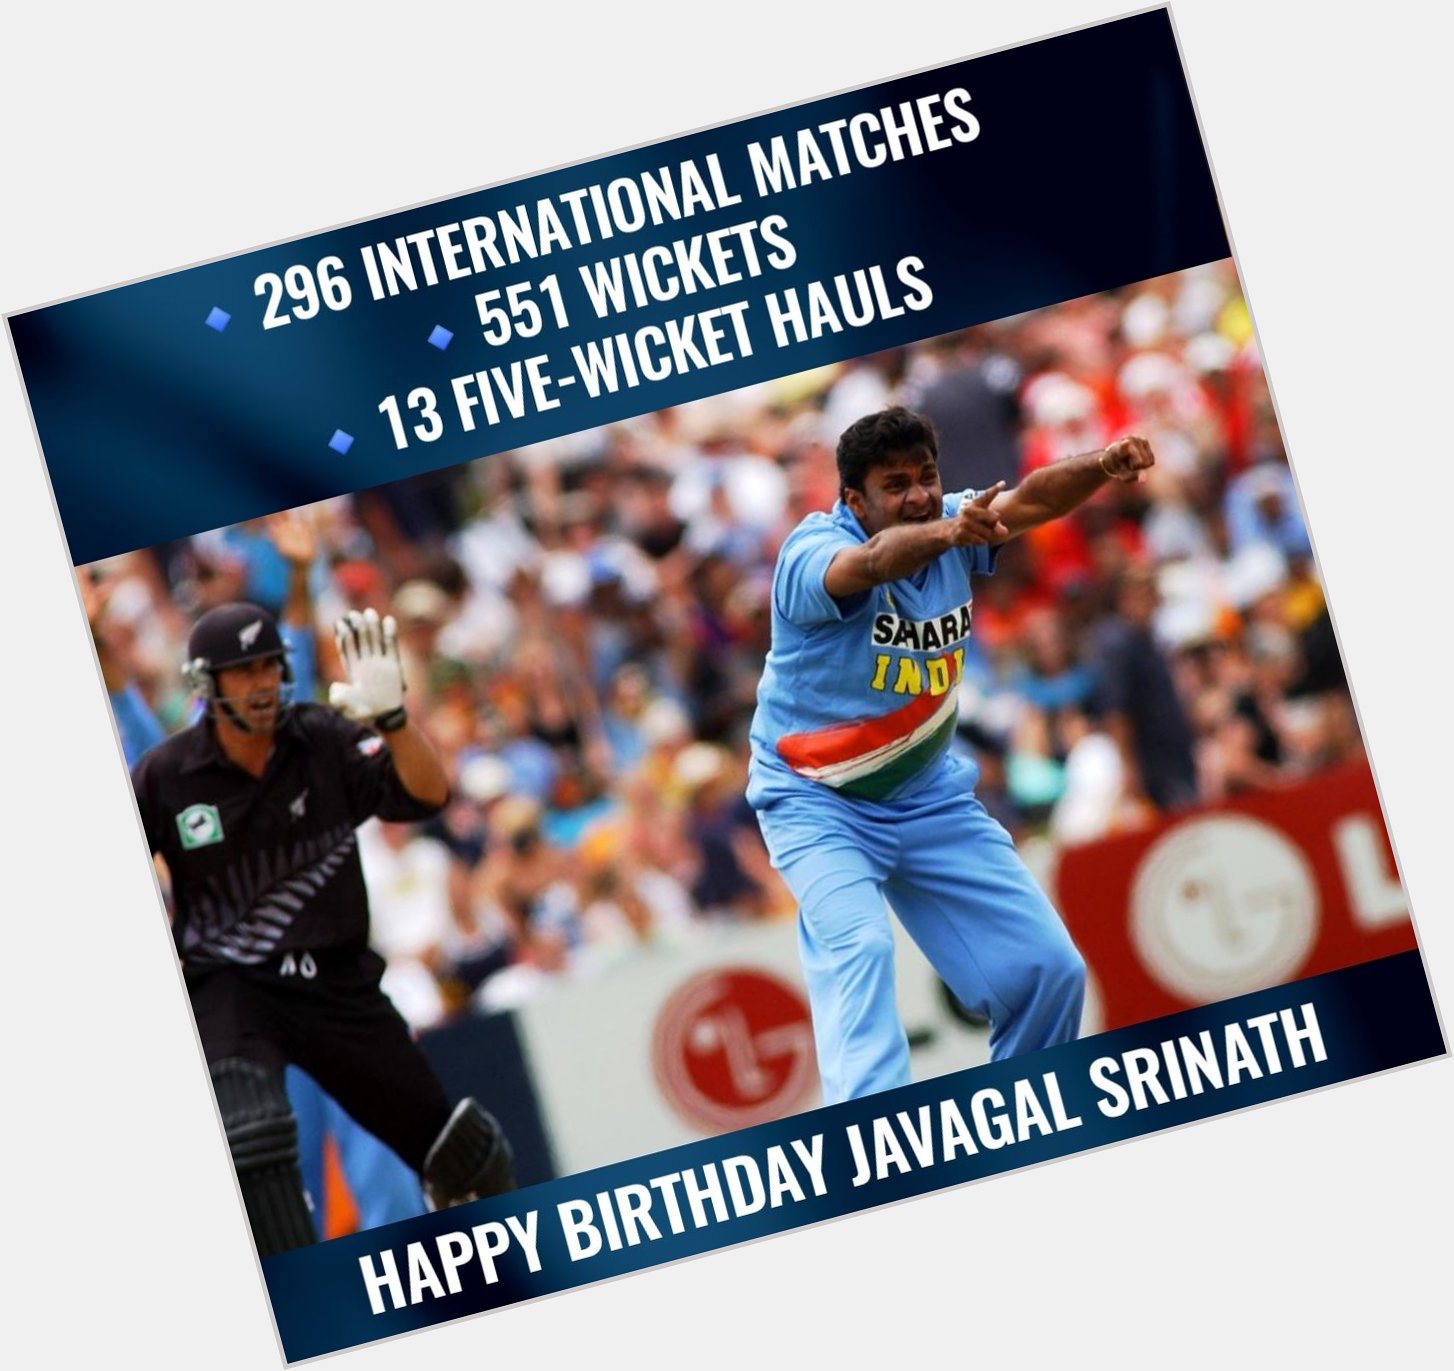 Wishing former Indian pacer Javagal Srinath a very happy birthday. 